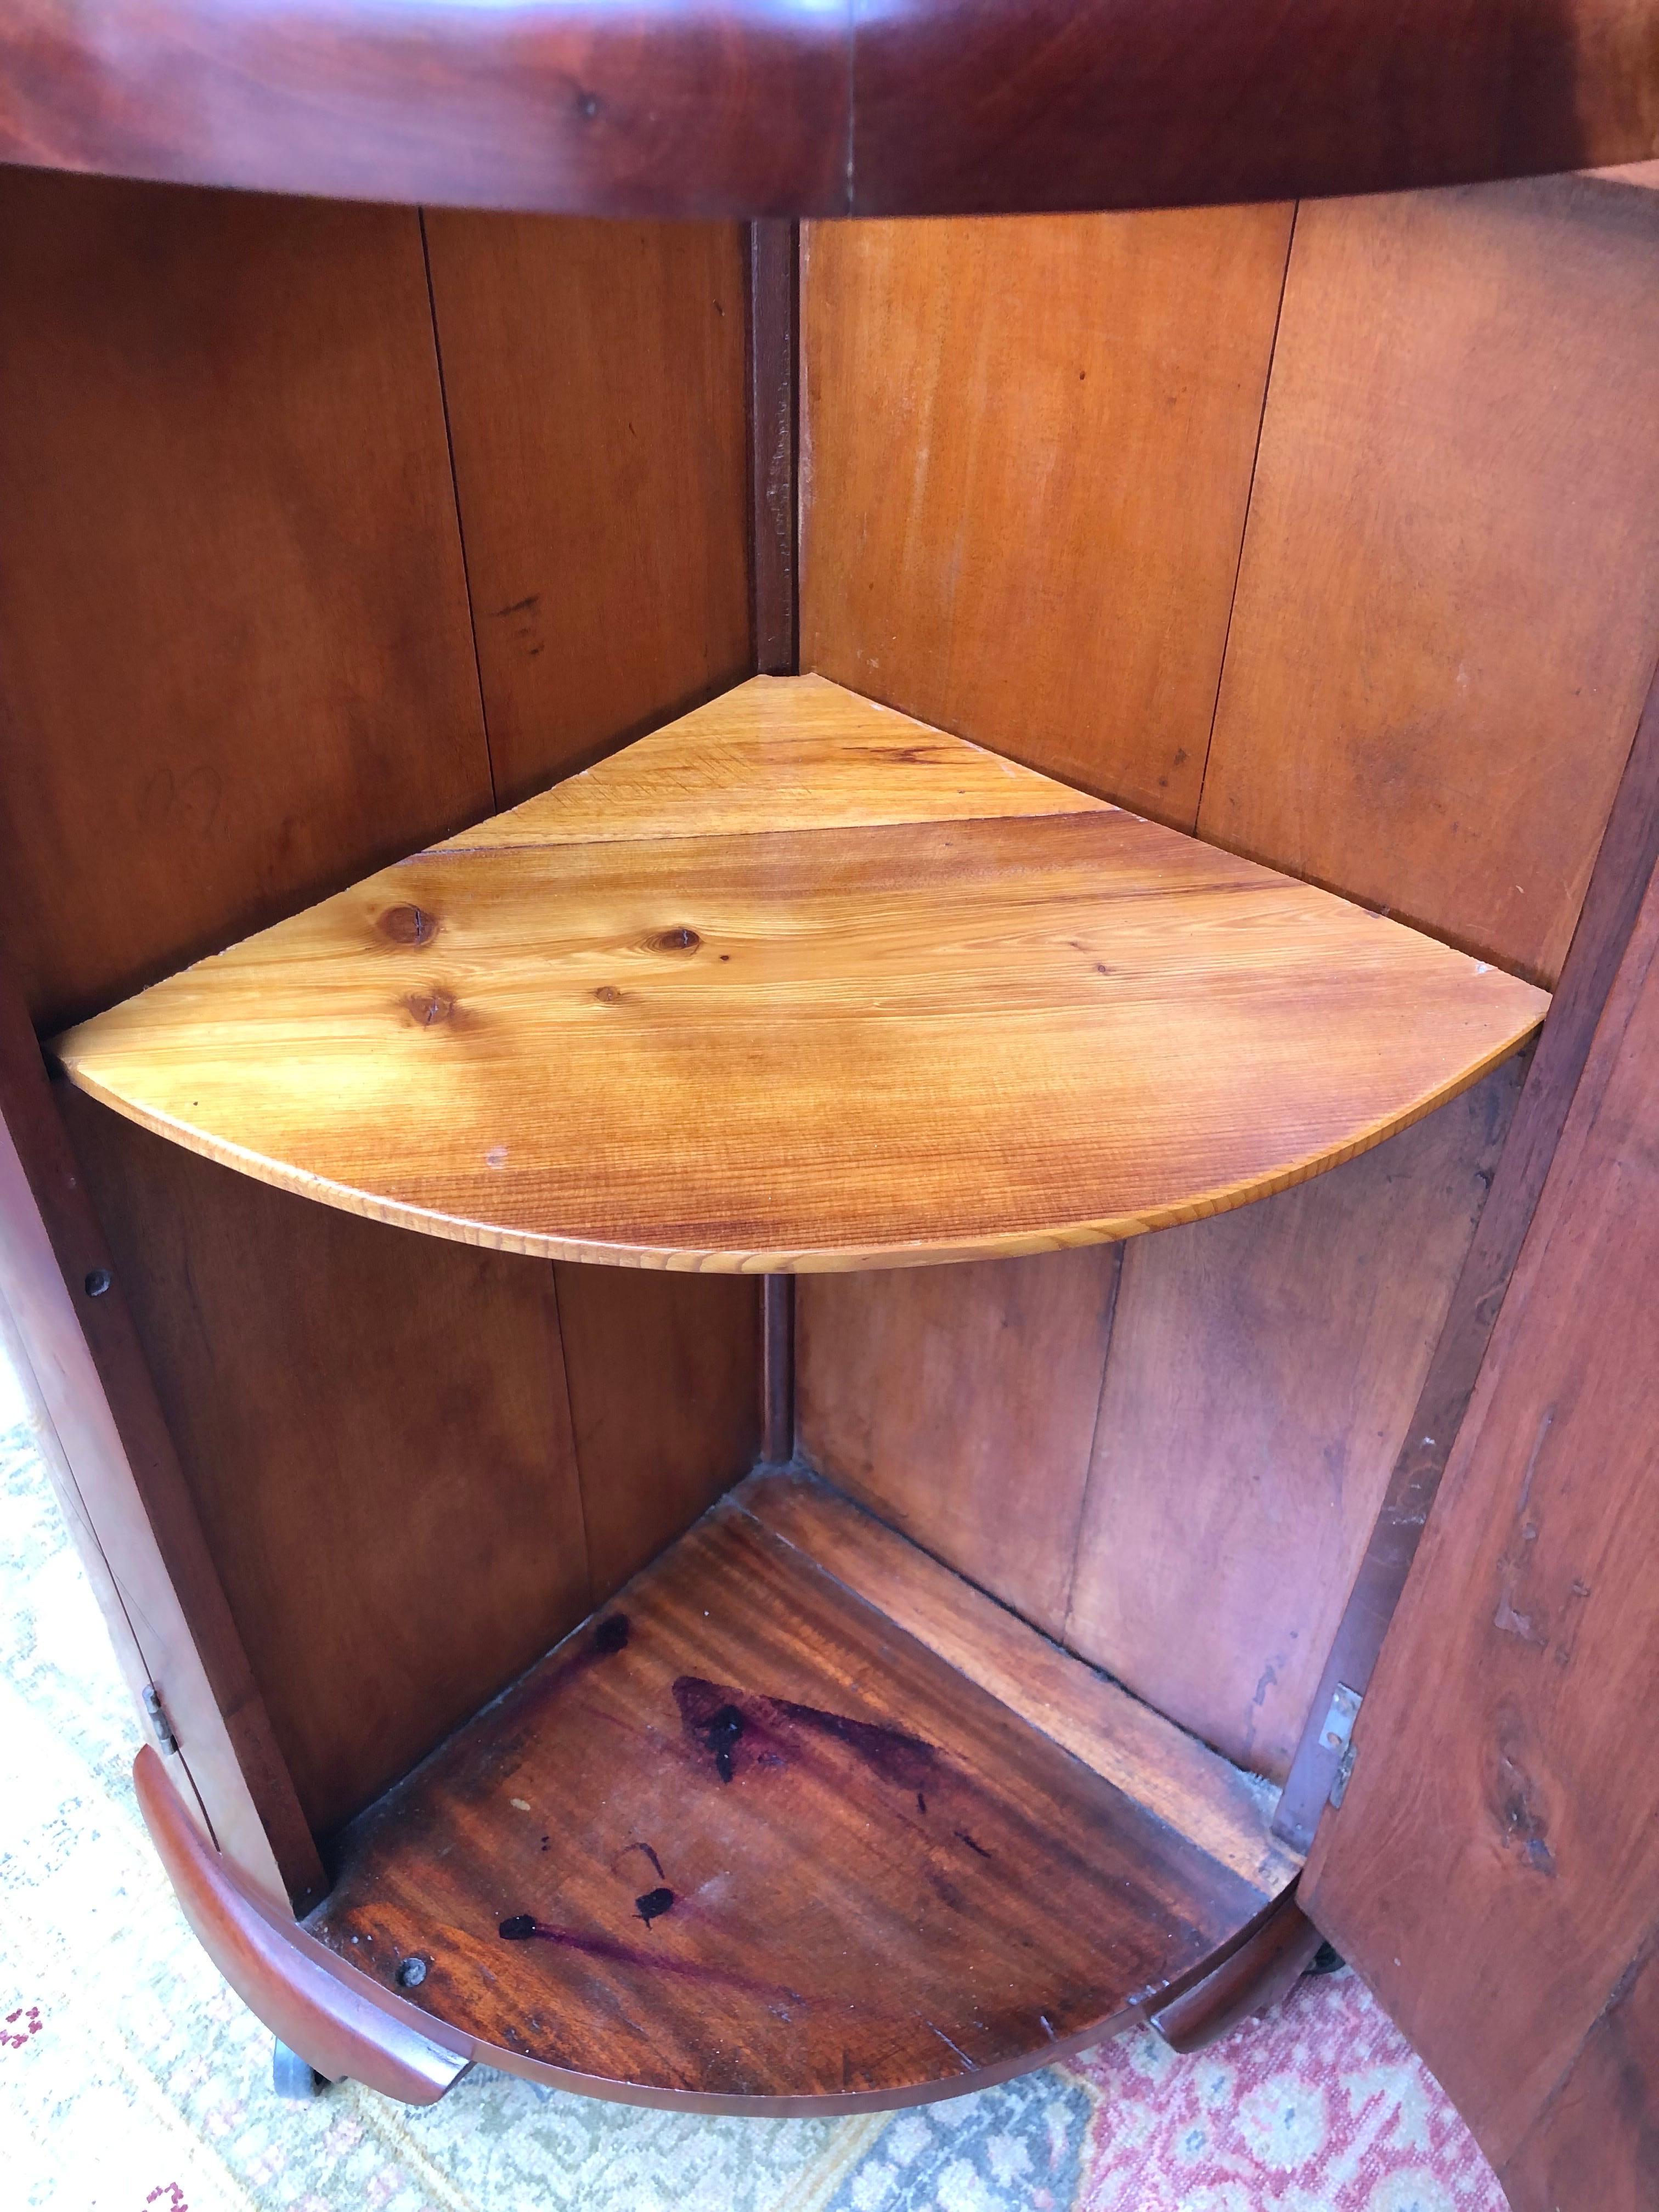 Jamaican Art Deco Round Bar/Cocktail Cabinet By Burnett Webster(circa.1934-1939) For Sale 7